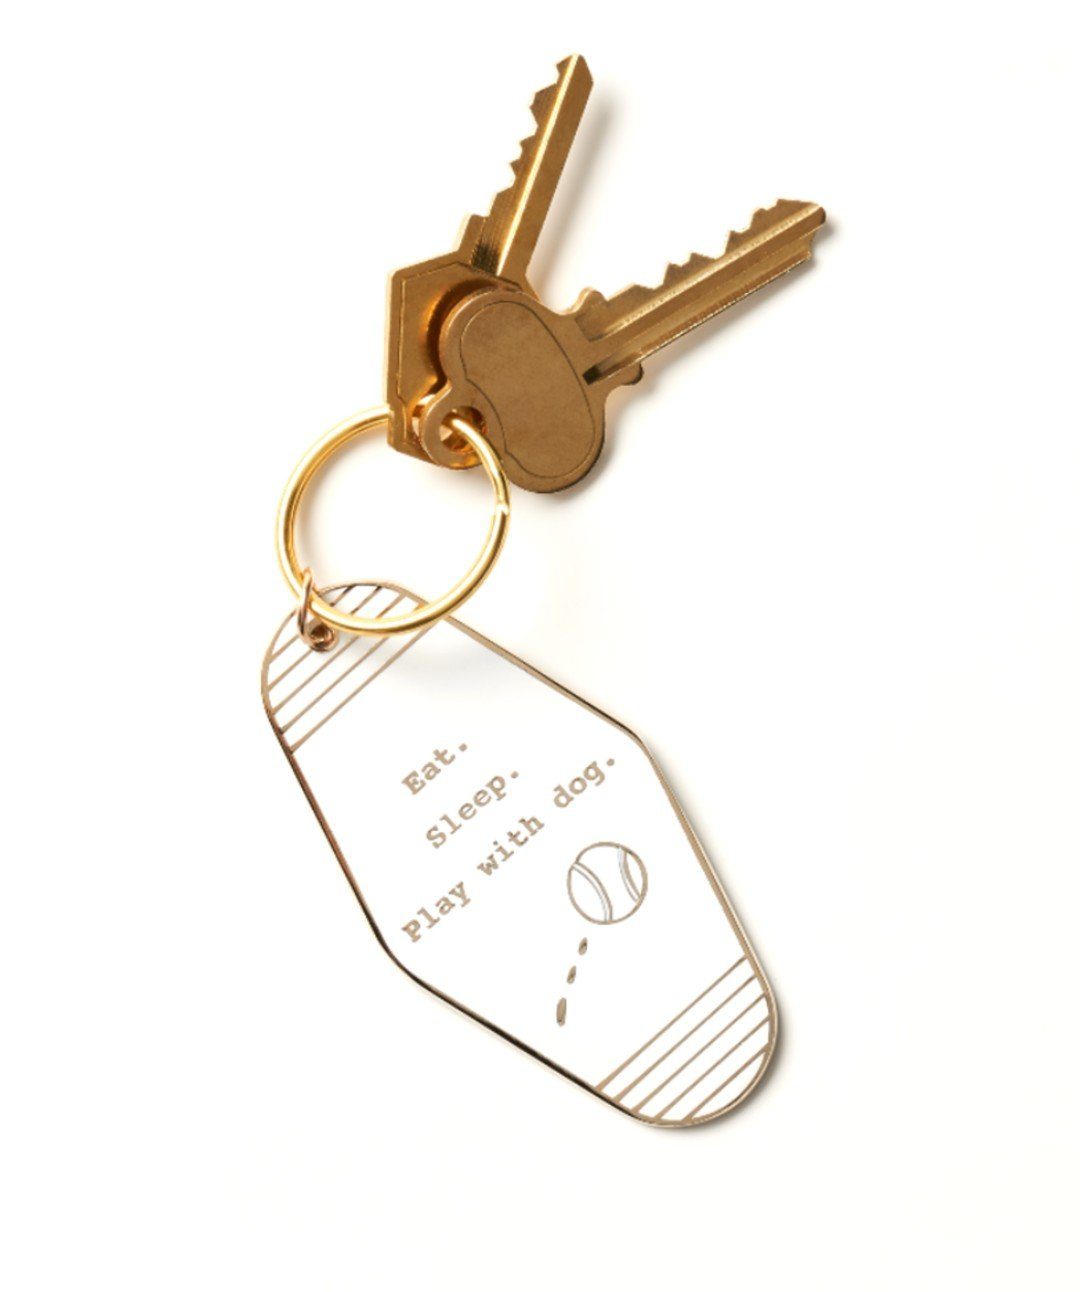 ‘Eat. Sleep. Play With Dog’ Keychain Accessories Rover 